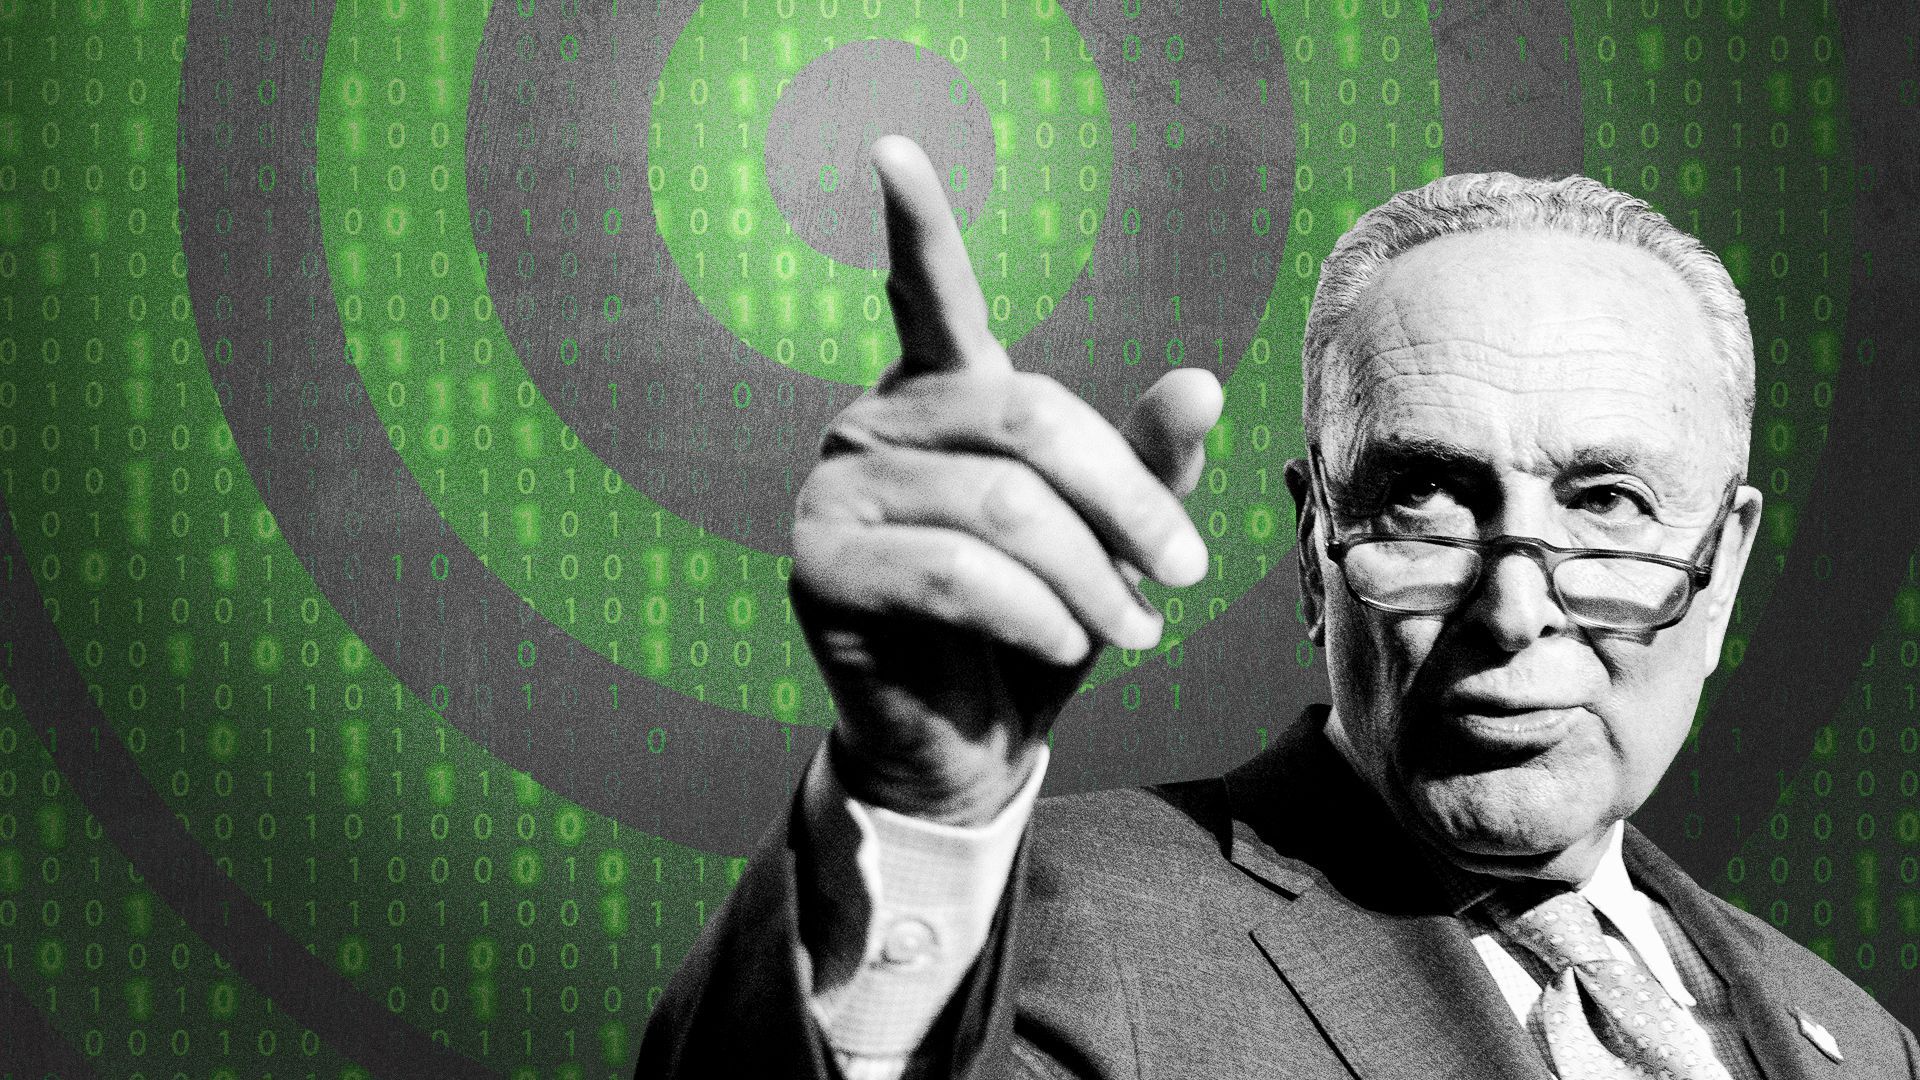 Photo illustration of Senator Chuck Schumer pointing his finger at a target made of binary numbers.